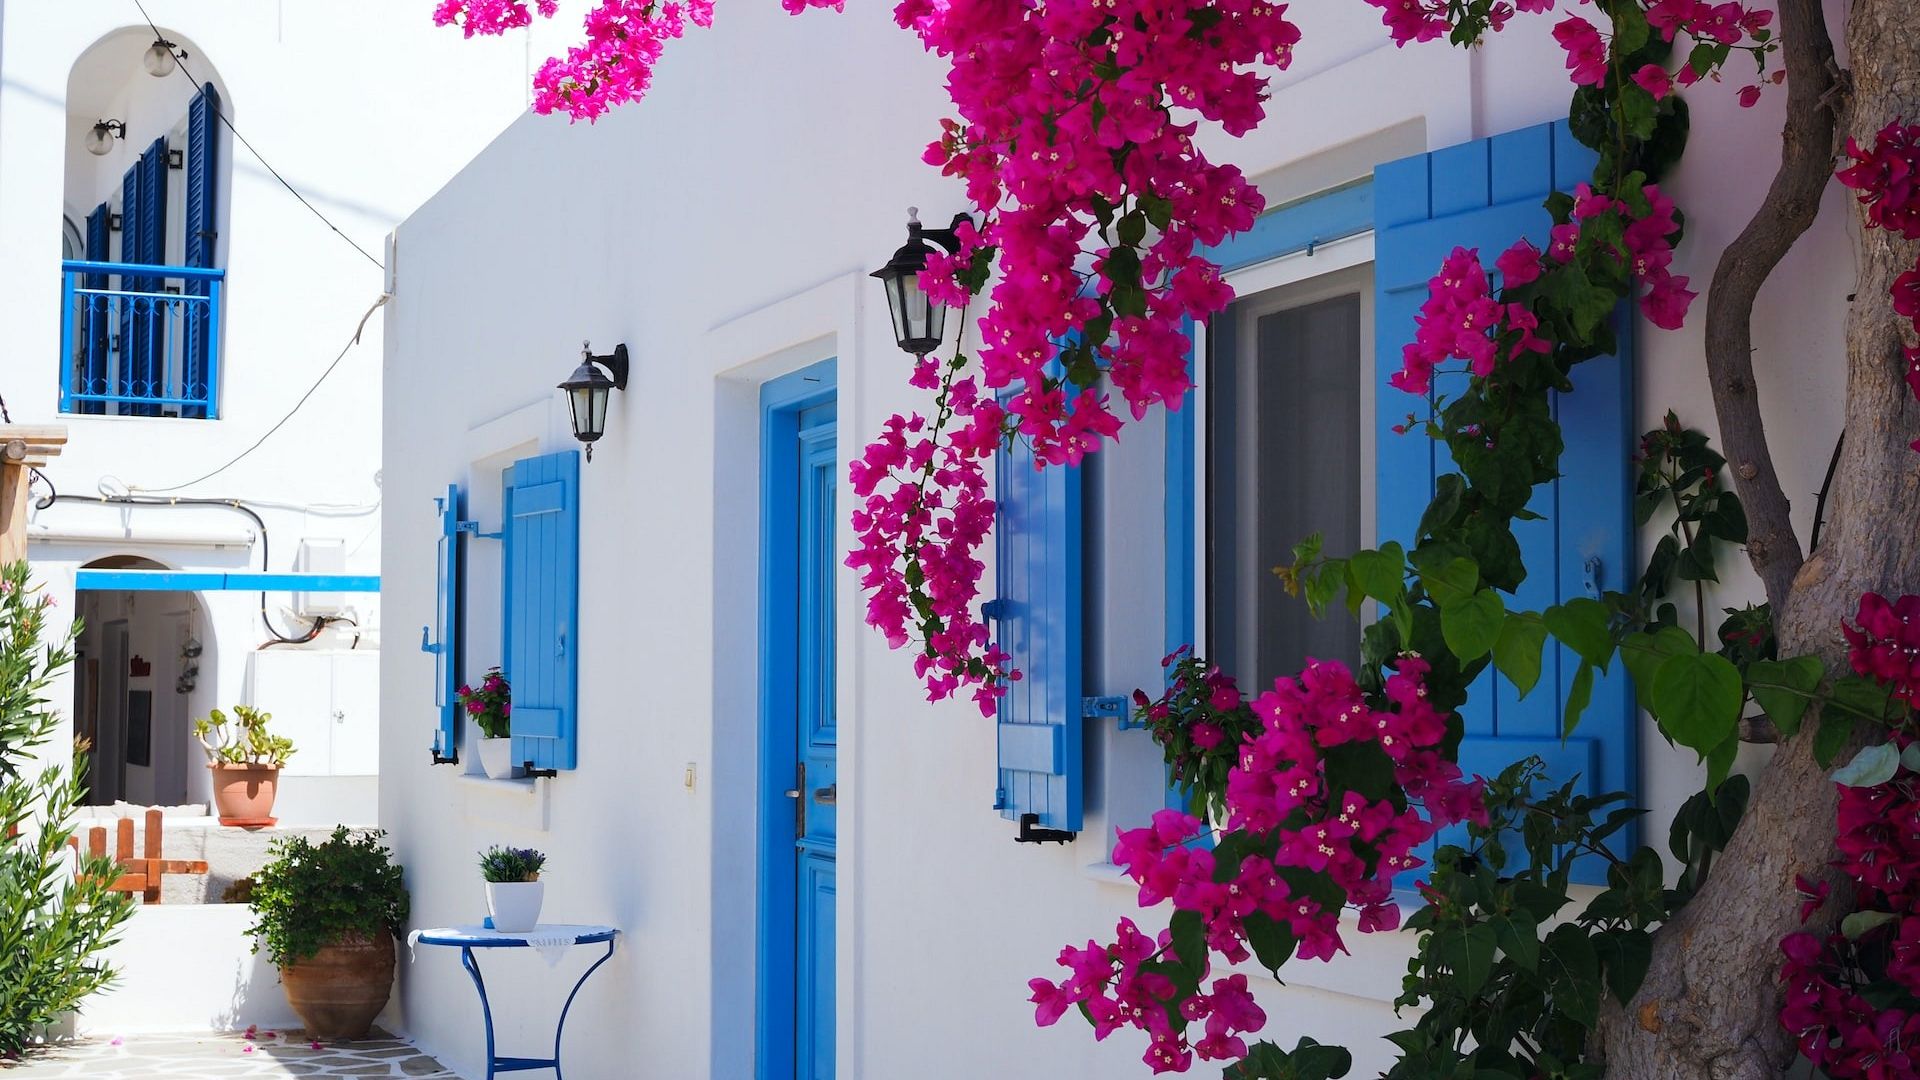 Antiparos island in one day: 5 ideas for holidays